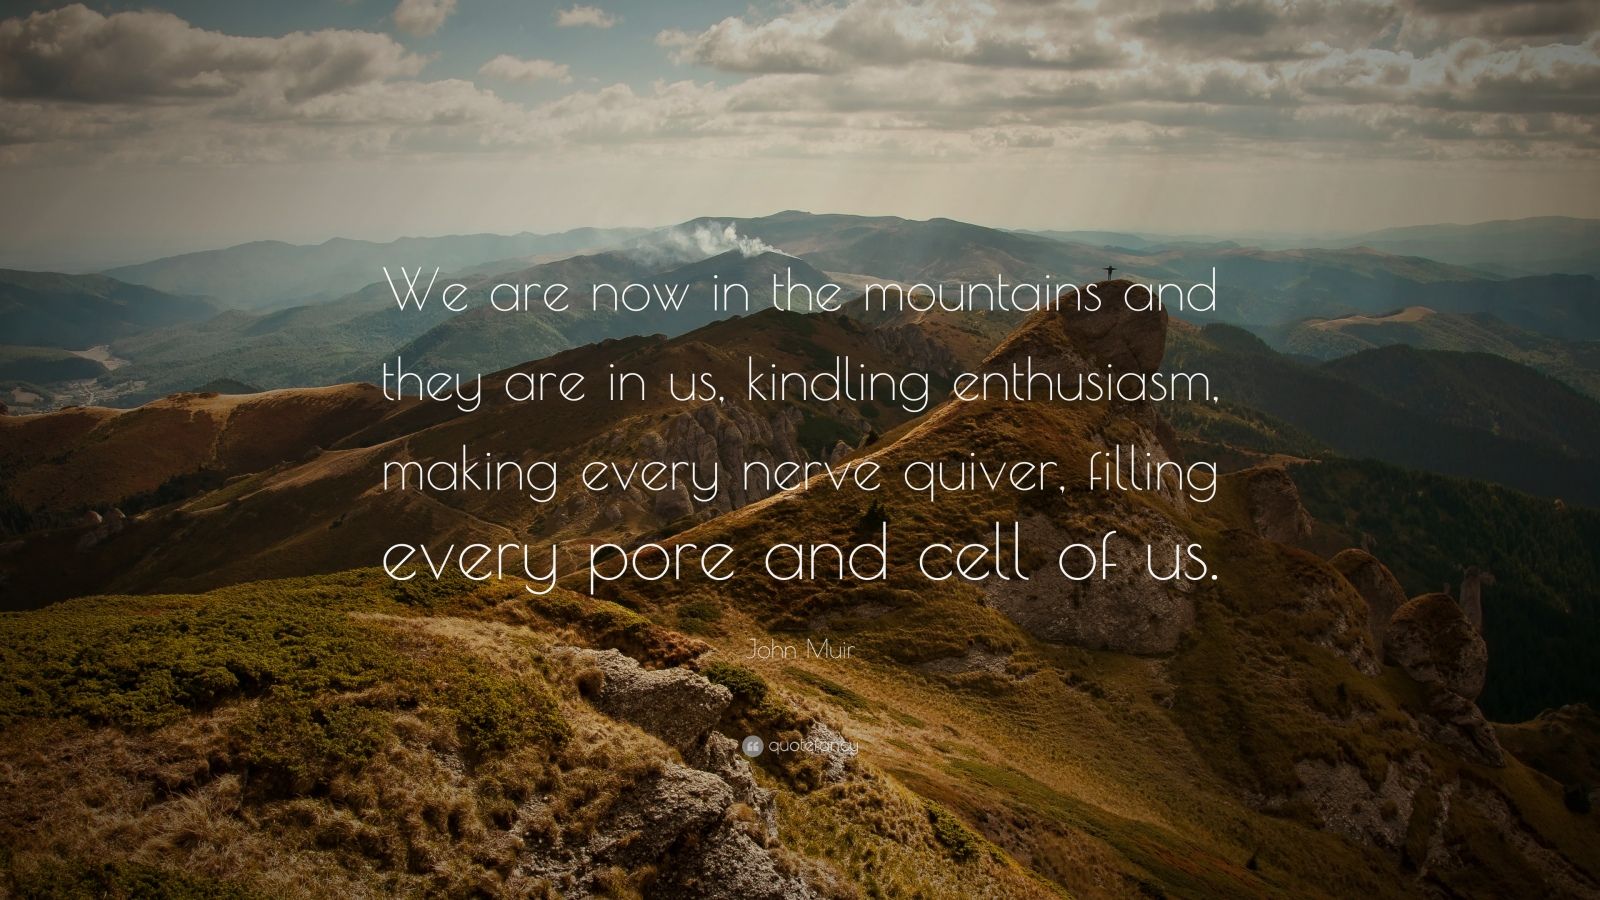 John Muir Quote: “We are now in the mountains and they are in us, kindling enthusiasm, making every nerve quiver, filling every pore and c.”